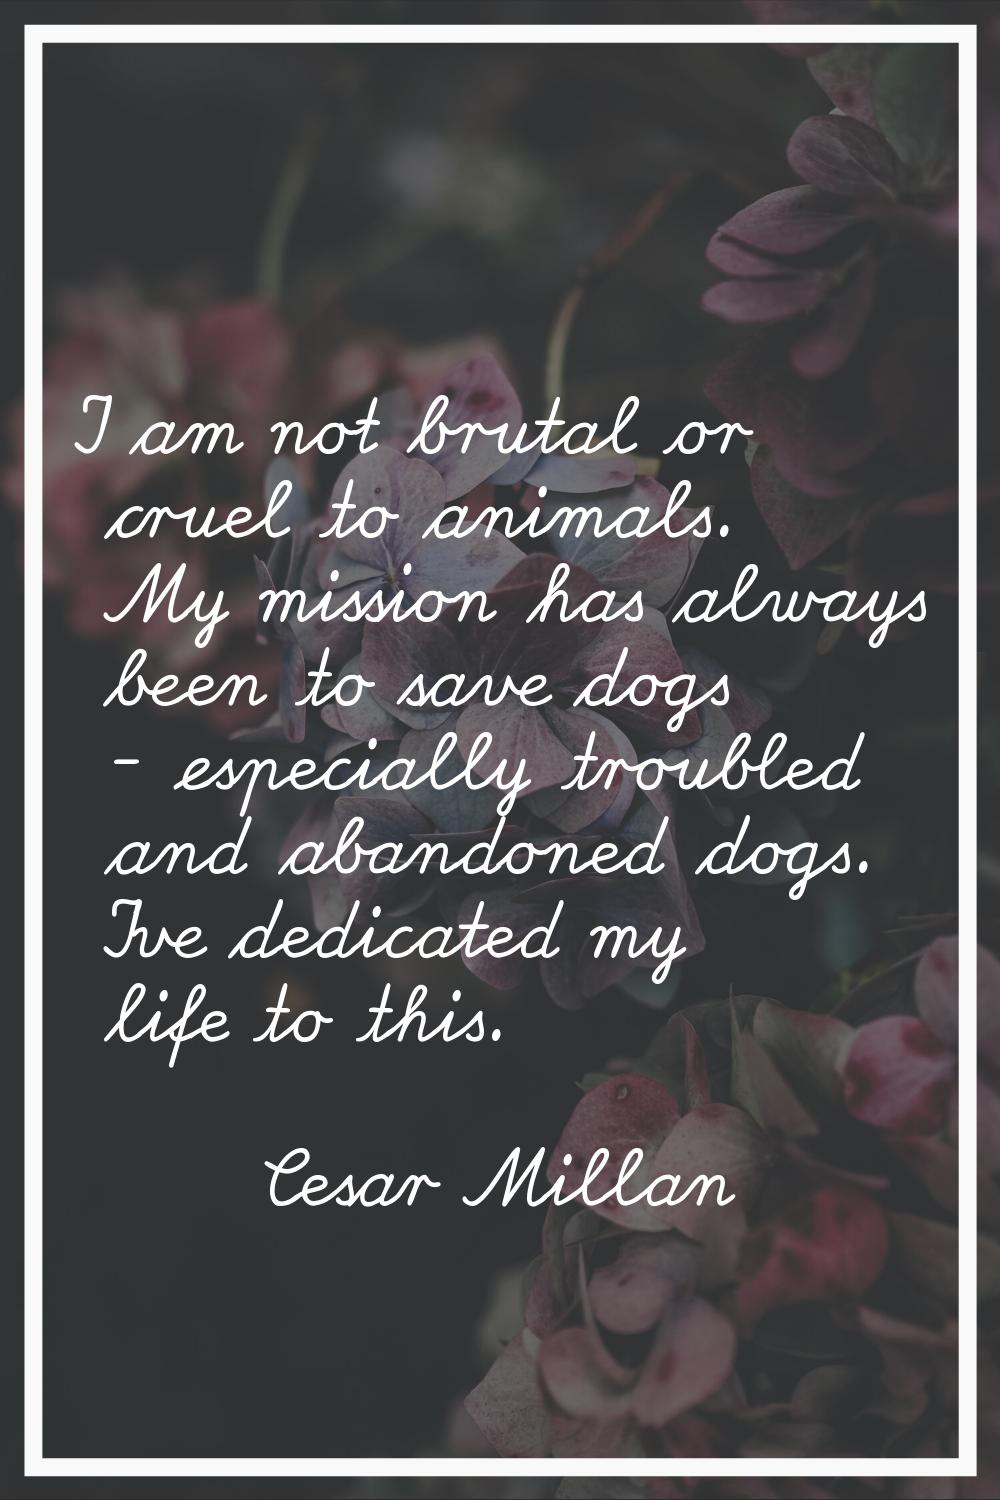 I am not brutal or cruel to animals. My mission has always been to save dogs - especially troubled 